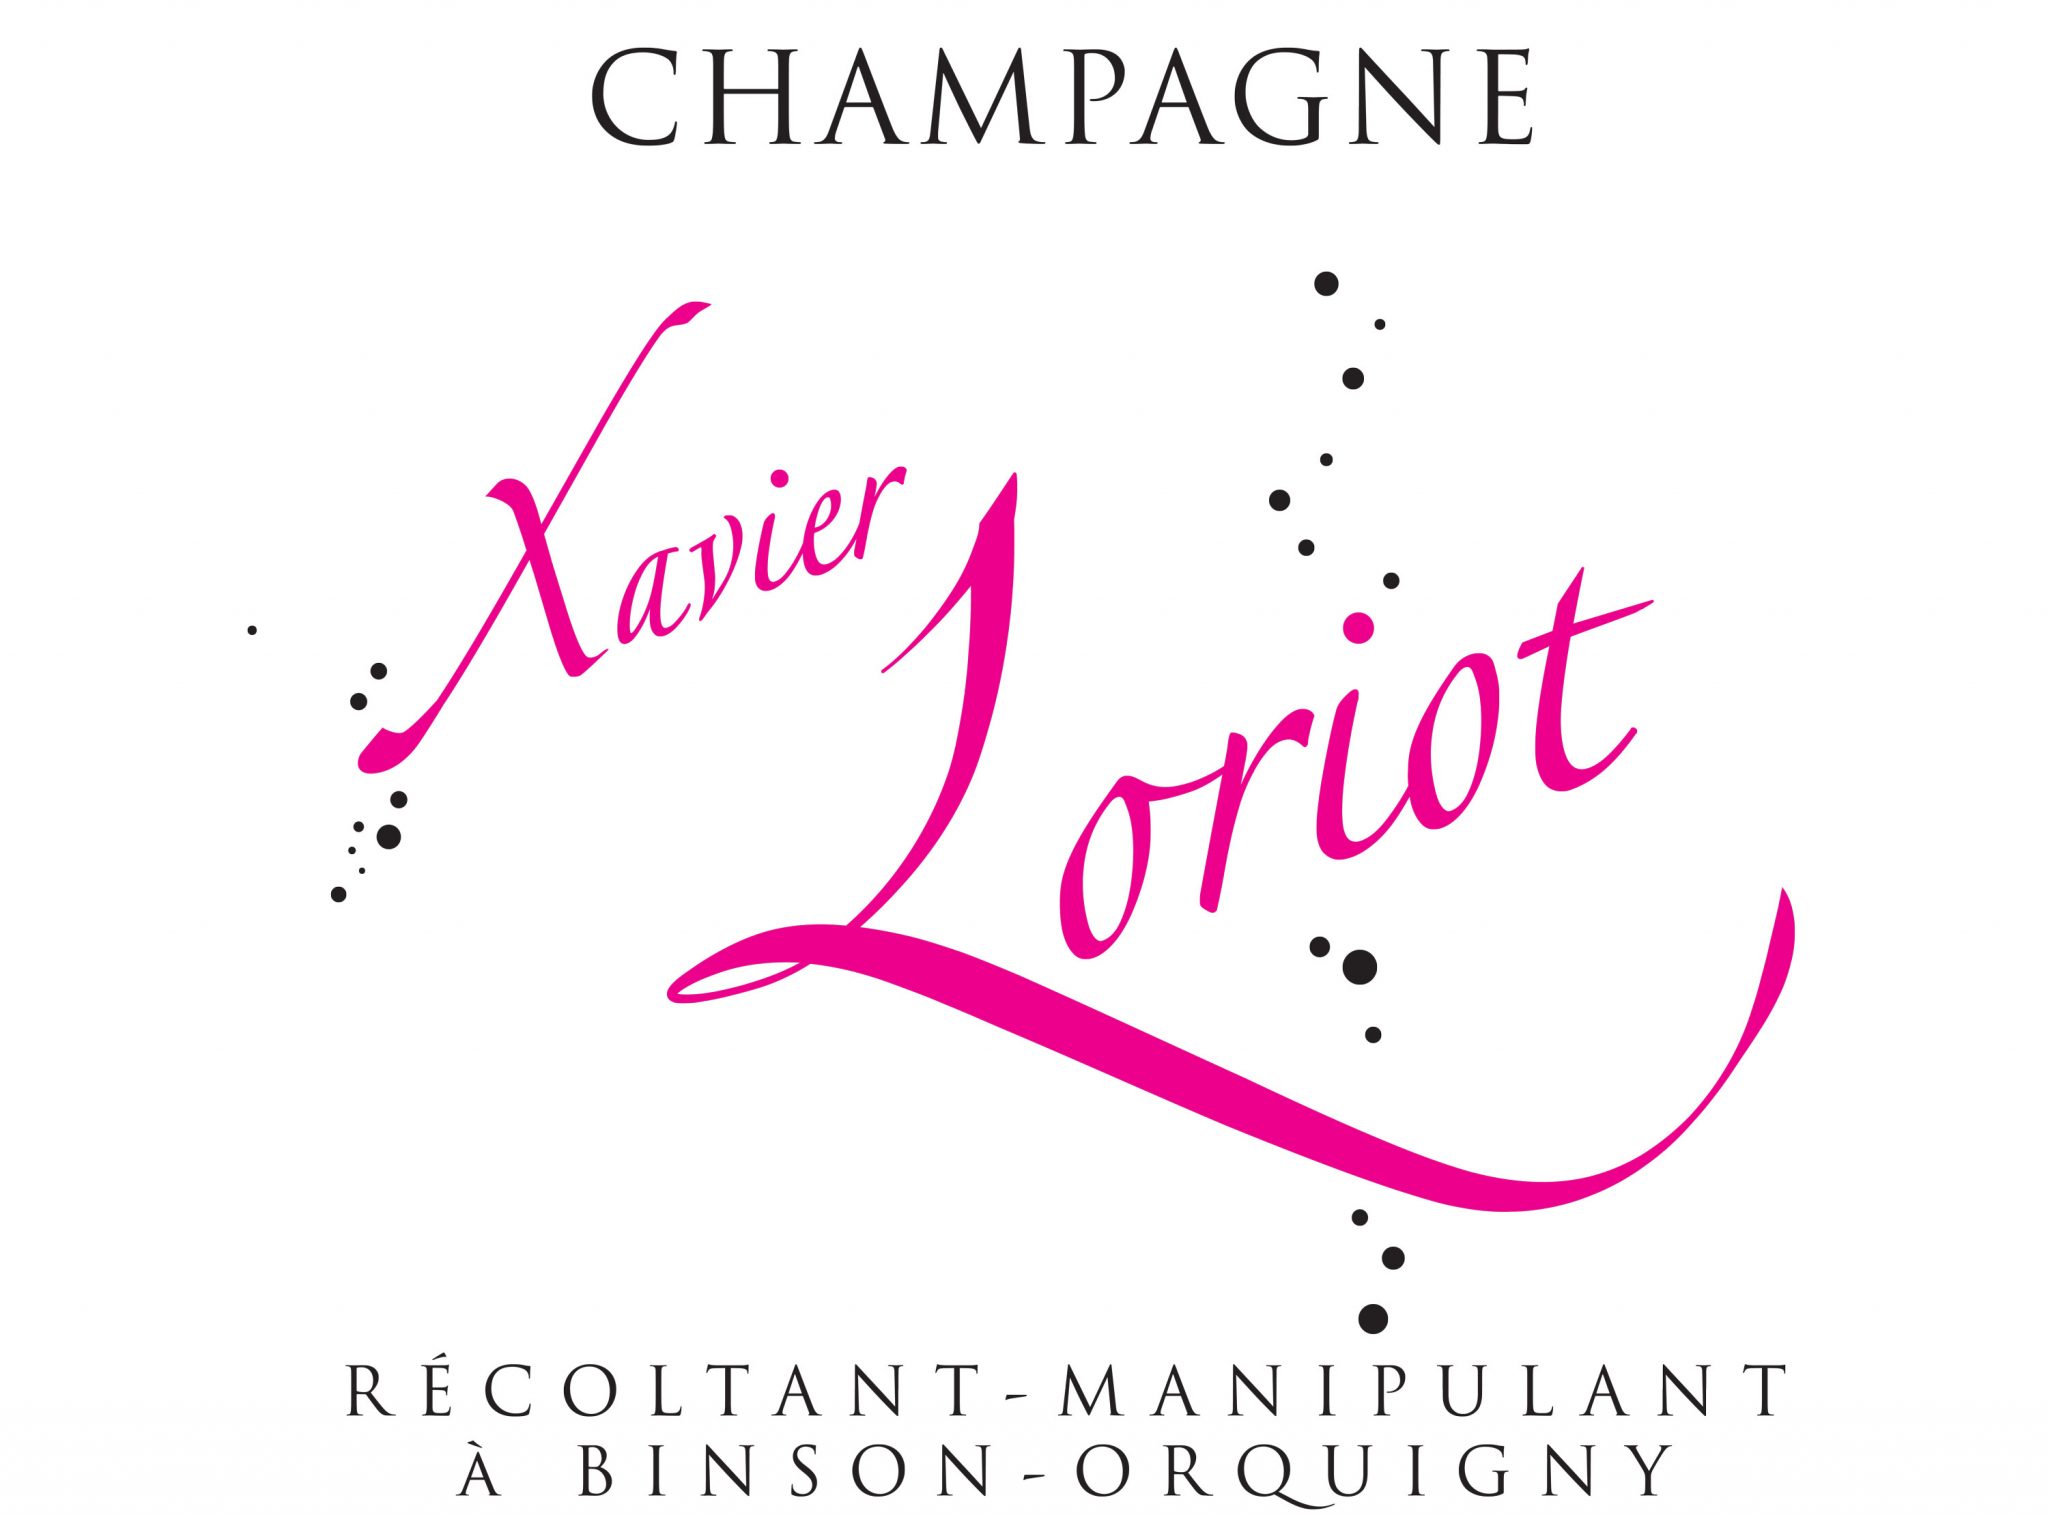 Champagne Xavier Loriot